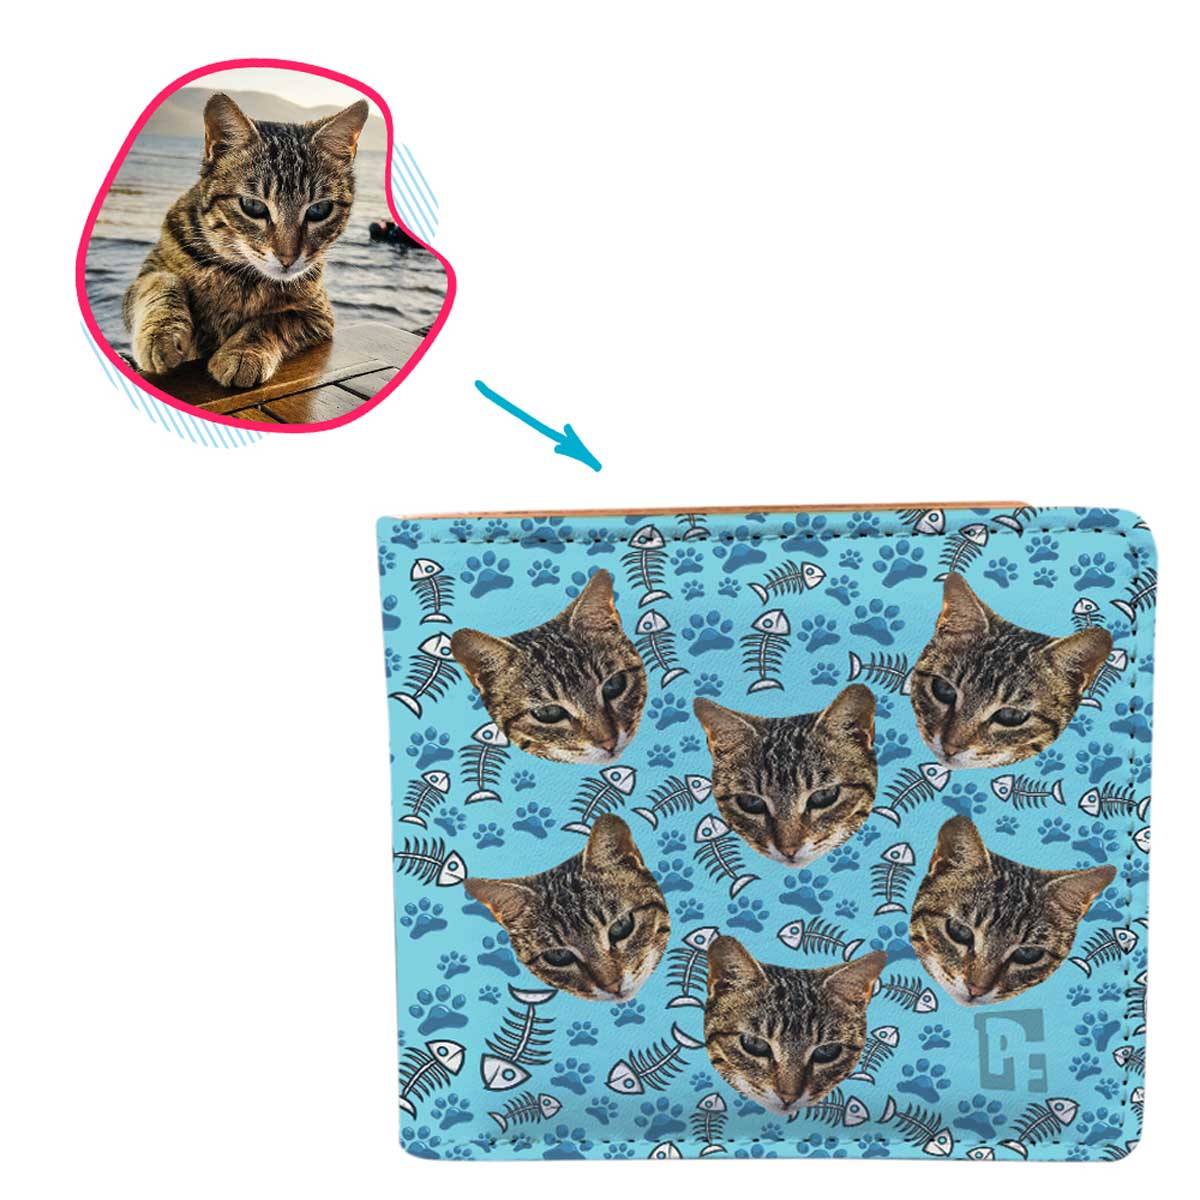 blue Cat wallet personalized with photo of face printed on it